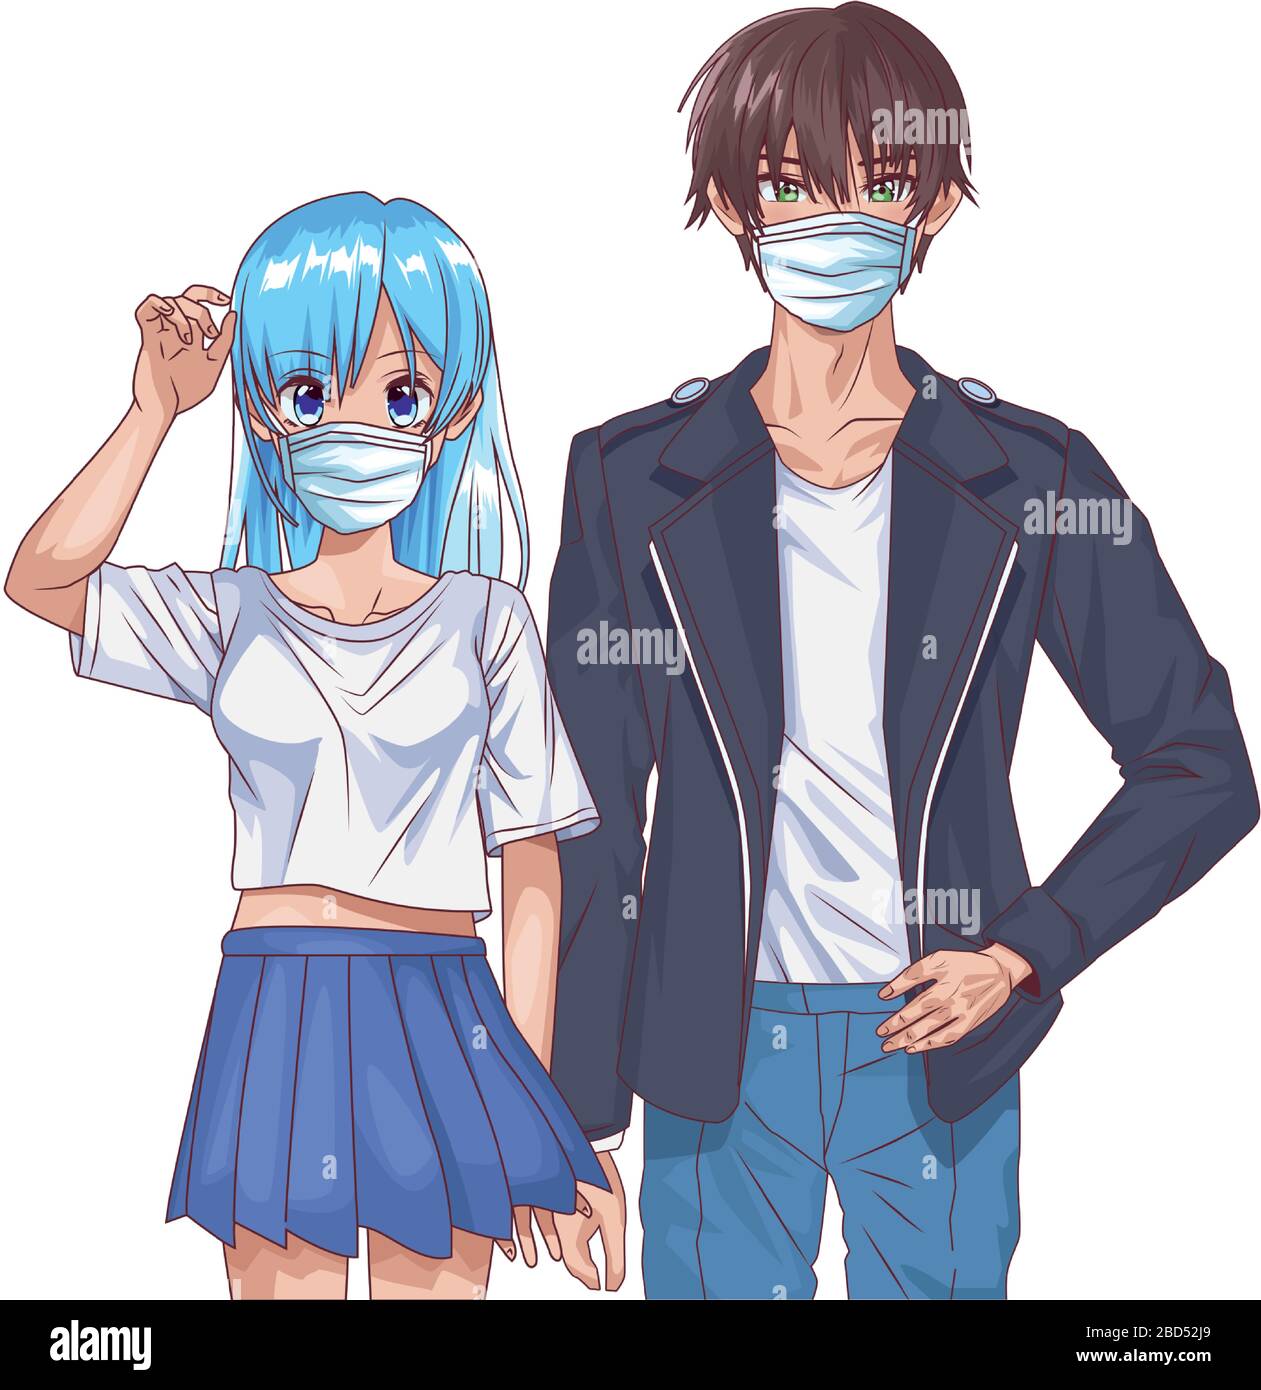 Anime Characters With Masks